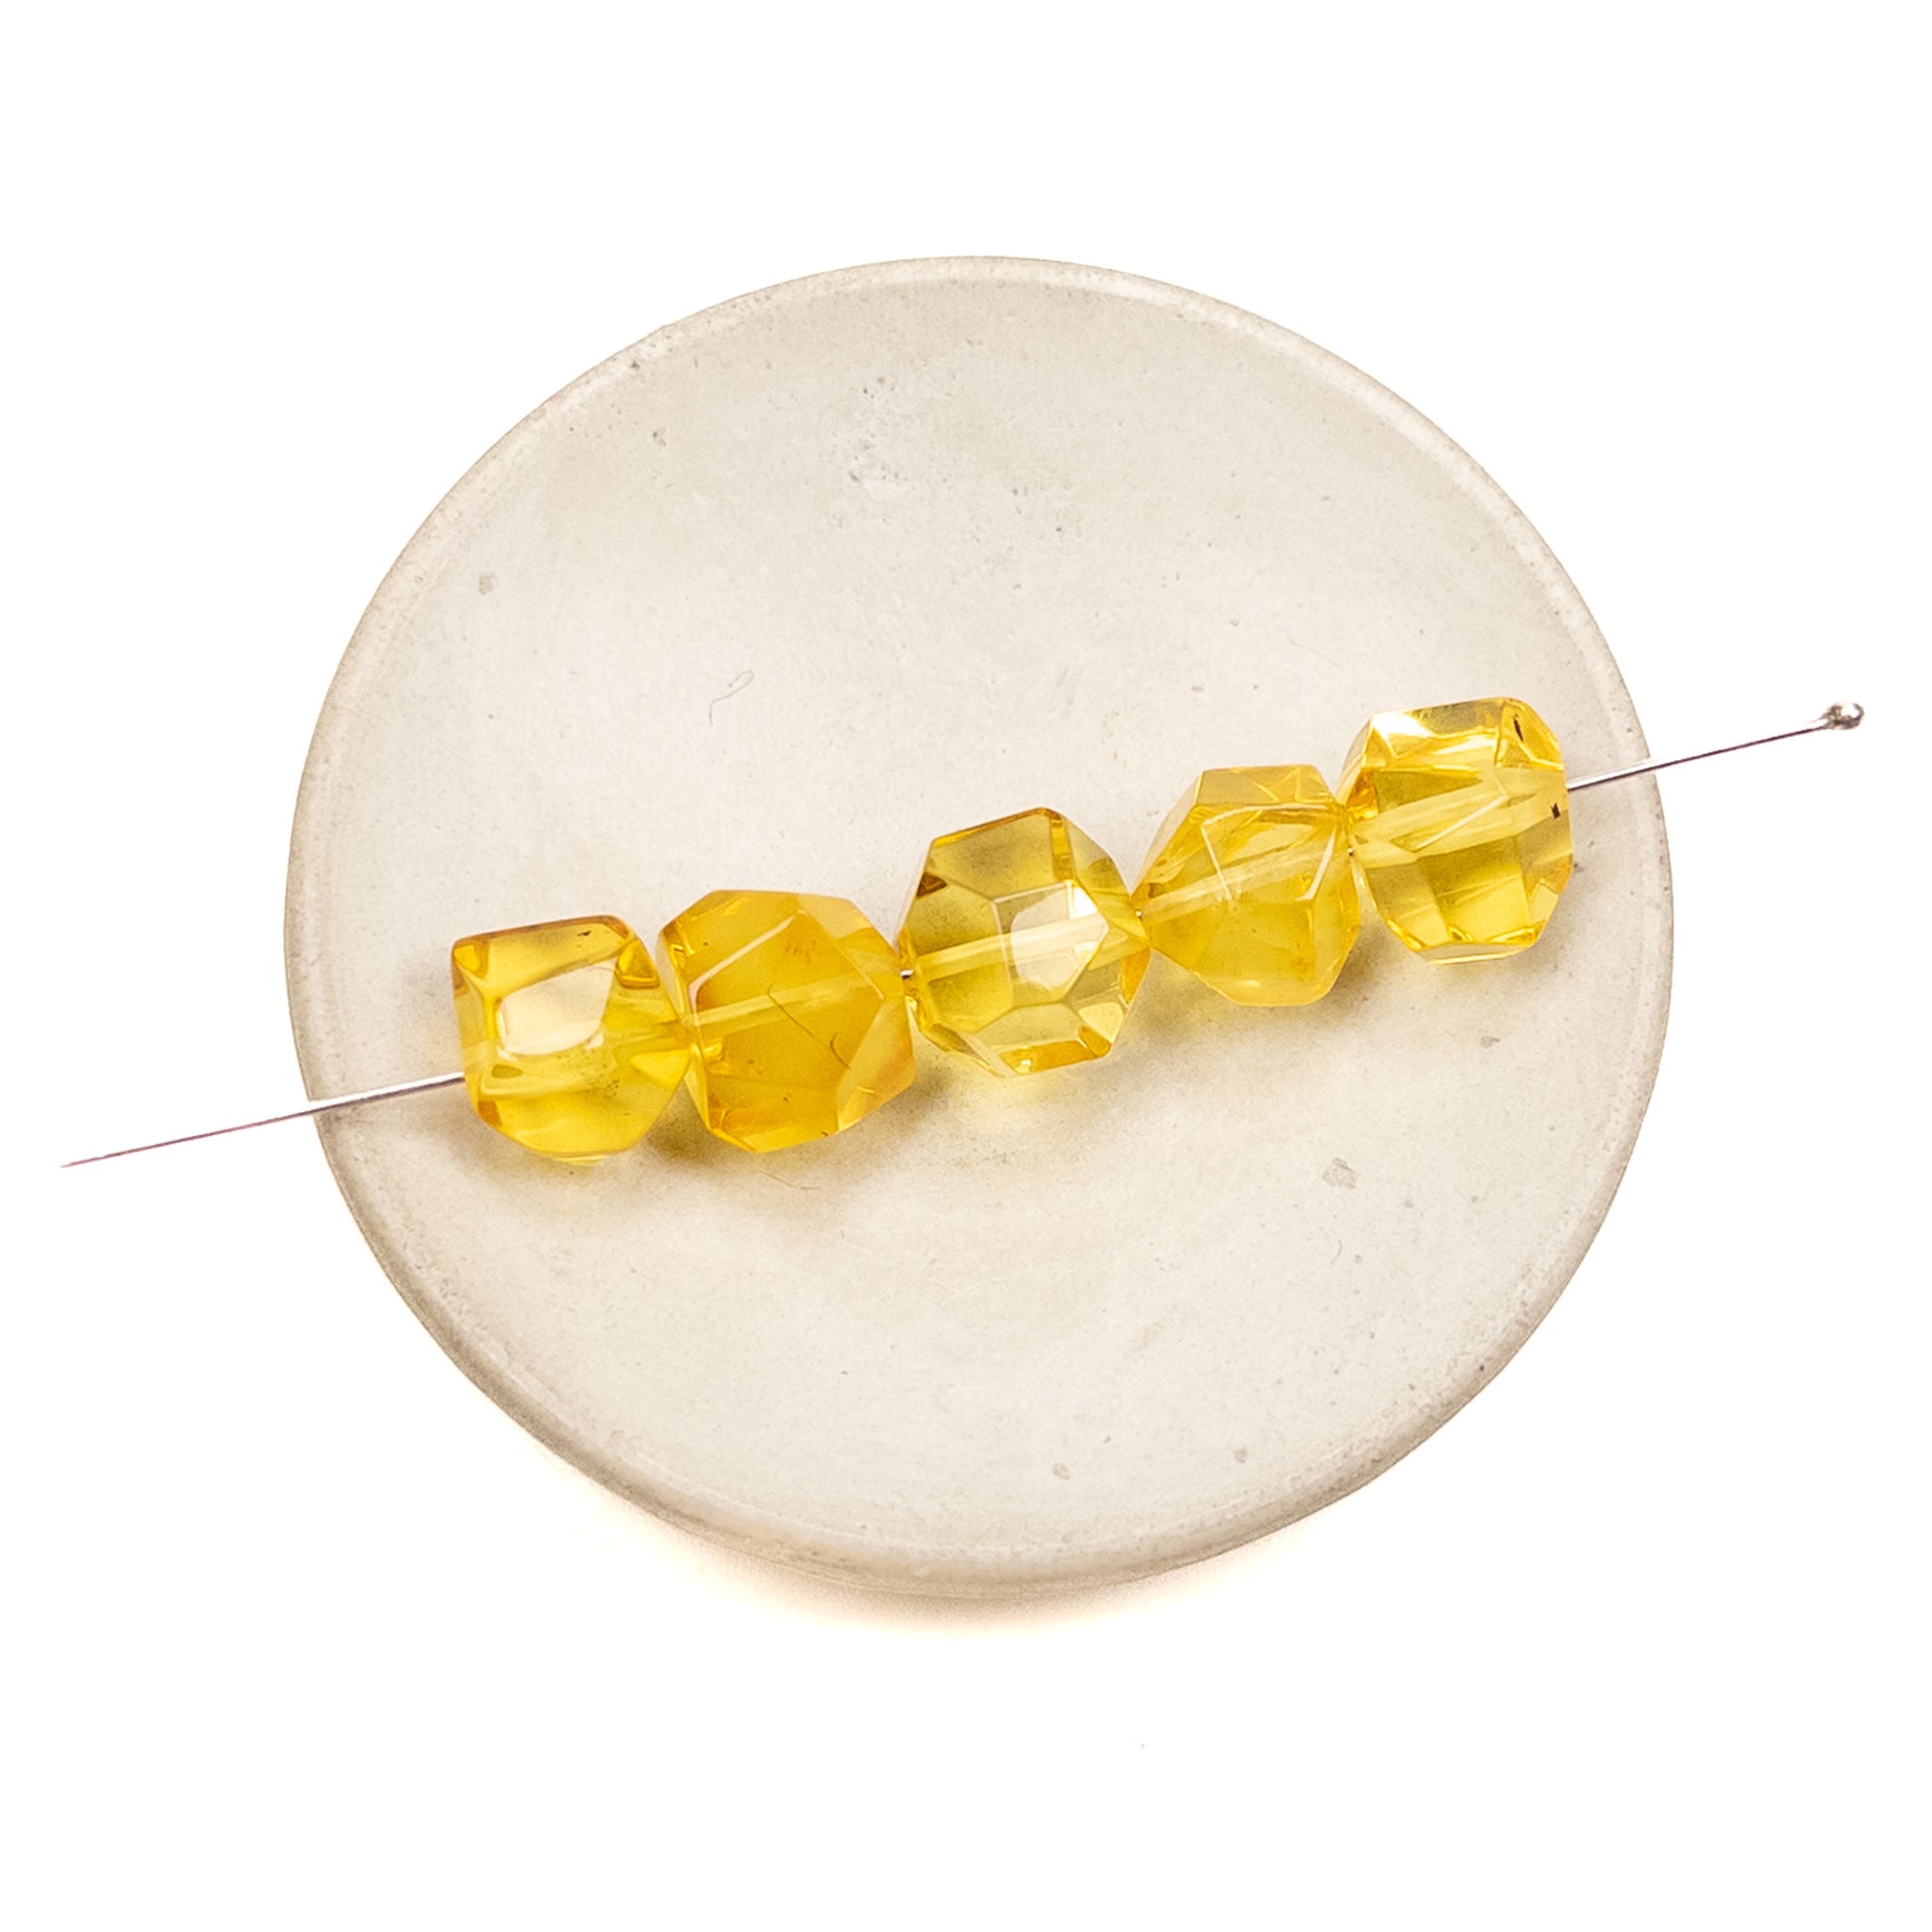 Amber 11-12mm Faceted Bead - 1 pc.